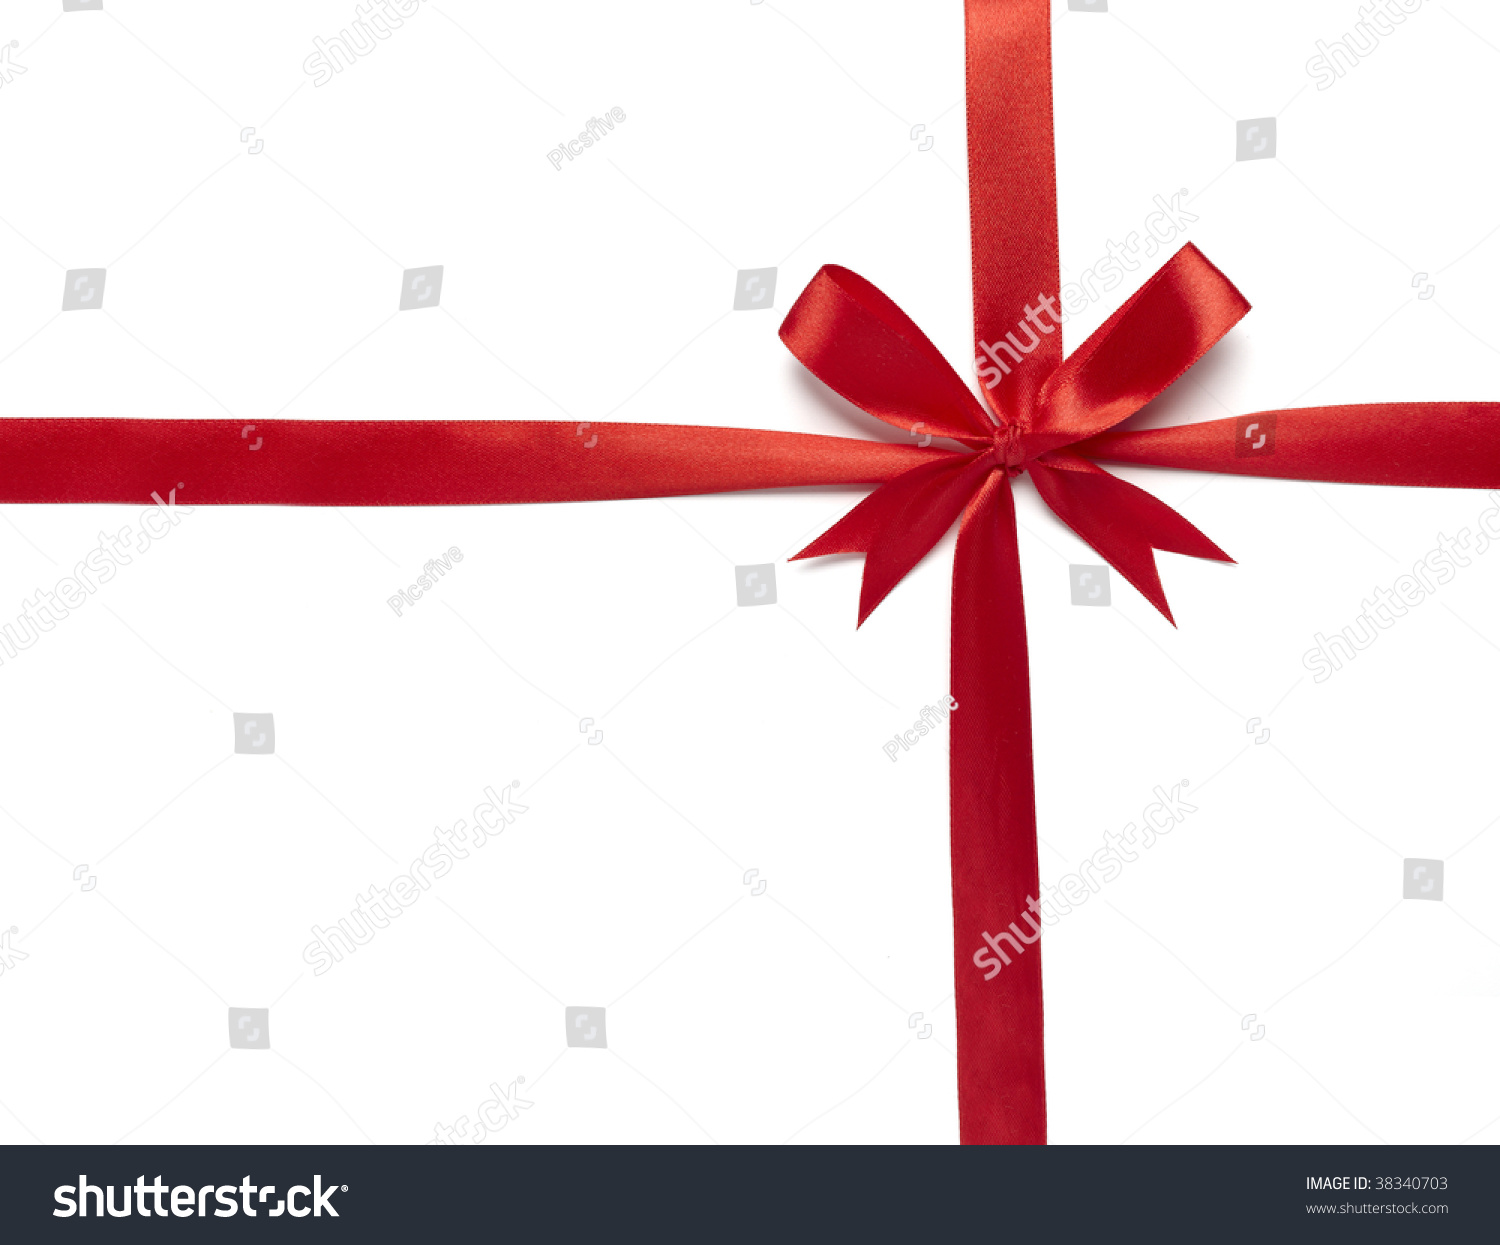 Close Red Ribbon On White Background Stock Photo 38340703 - Shutterstock